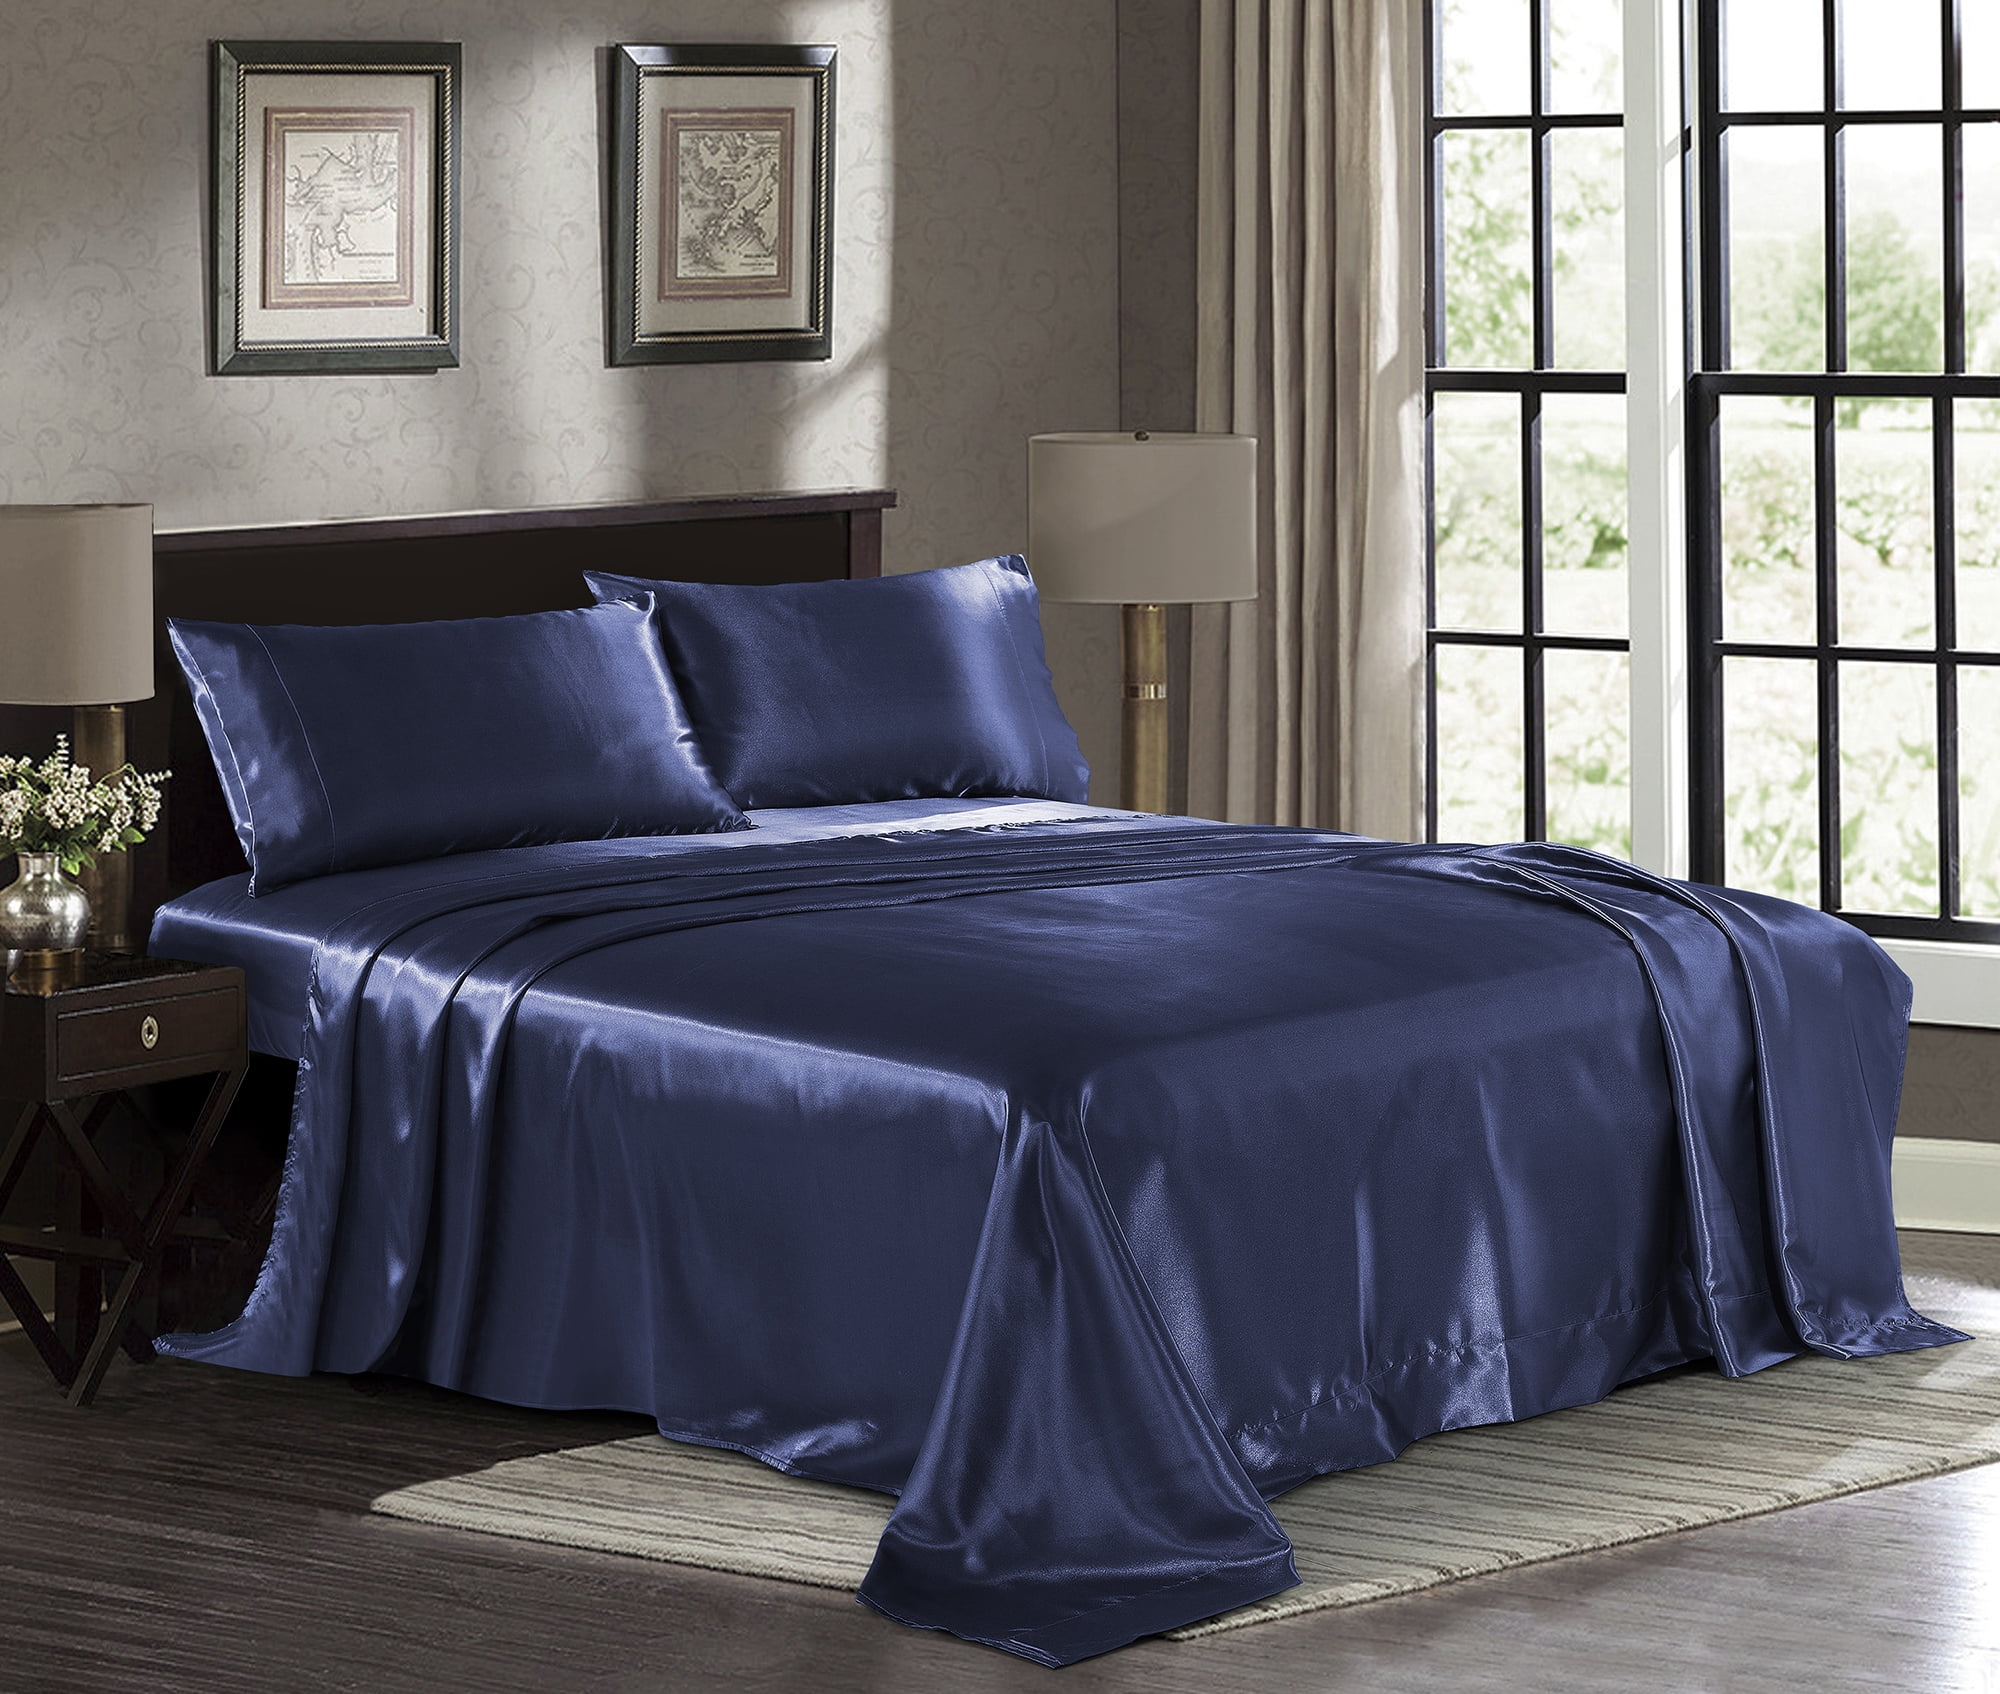 Satin Sheets Full [4-Piece, Midnight Blue] Hotel Luxury Silky Bed Sheets  Extra Soft 1800 Microfiber Sheet Set, Wrinkle, Fade, Stain Resistant Deep  Pocket Fitted Sheet, Flat Sheet, Pillow Cases